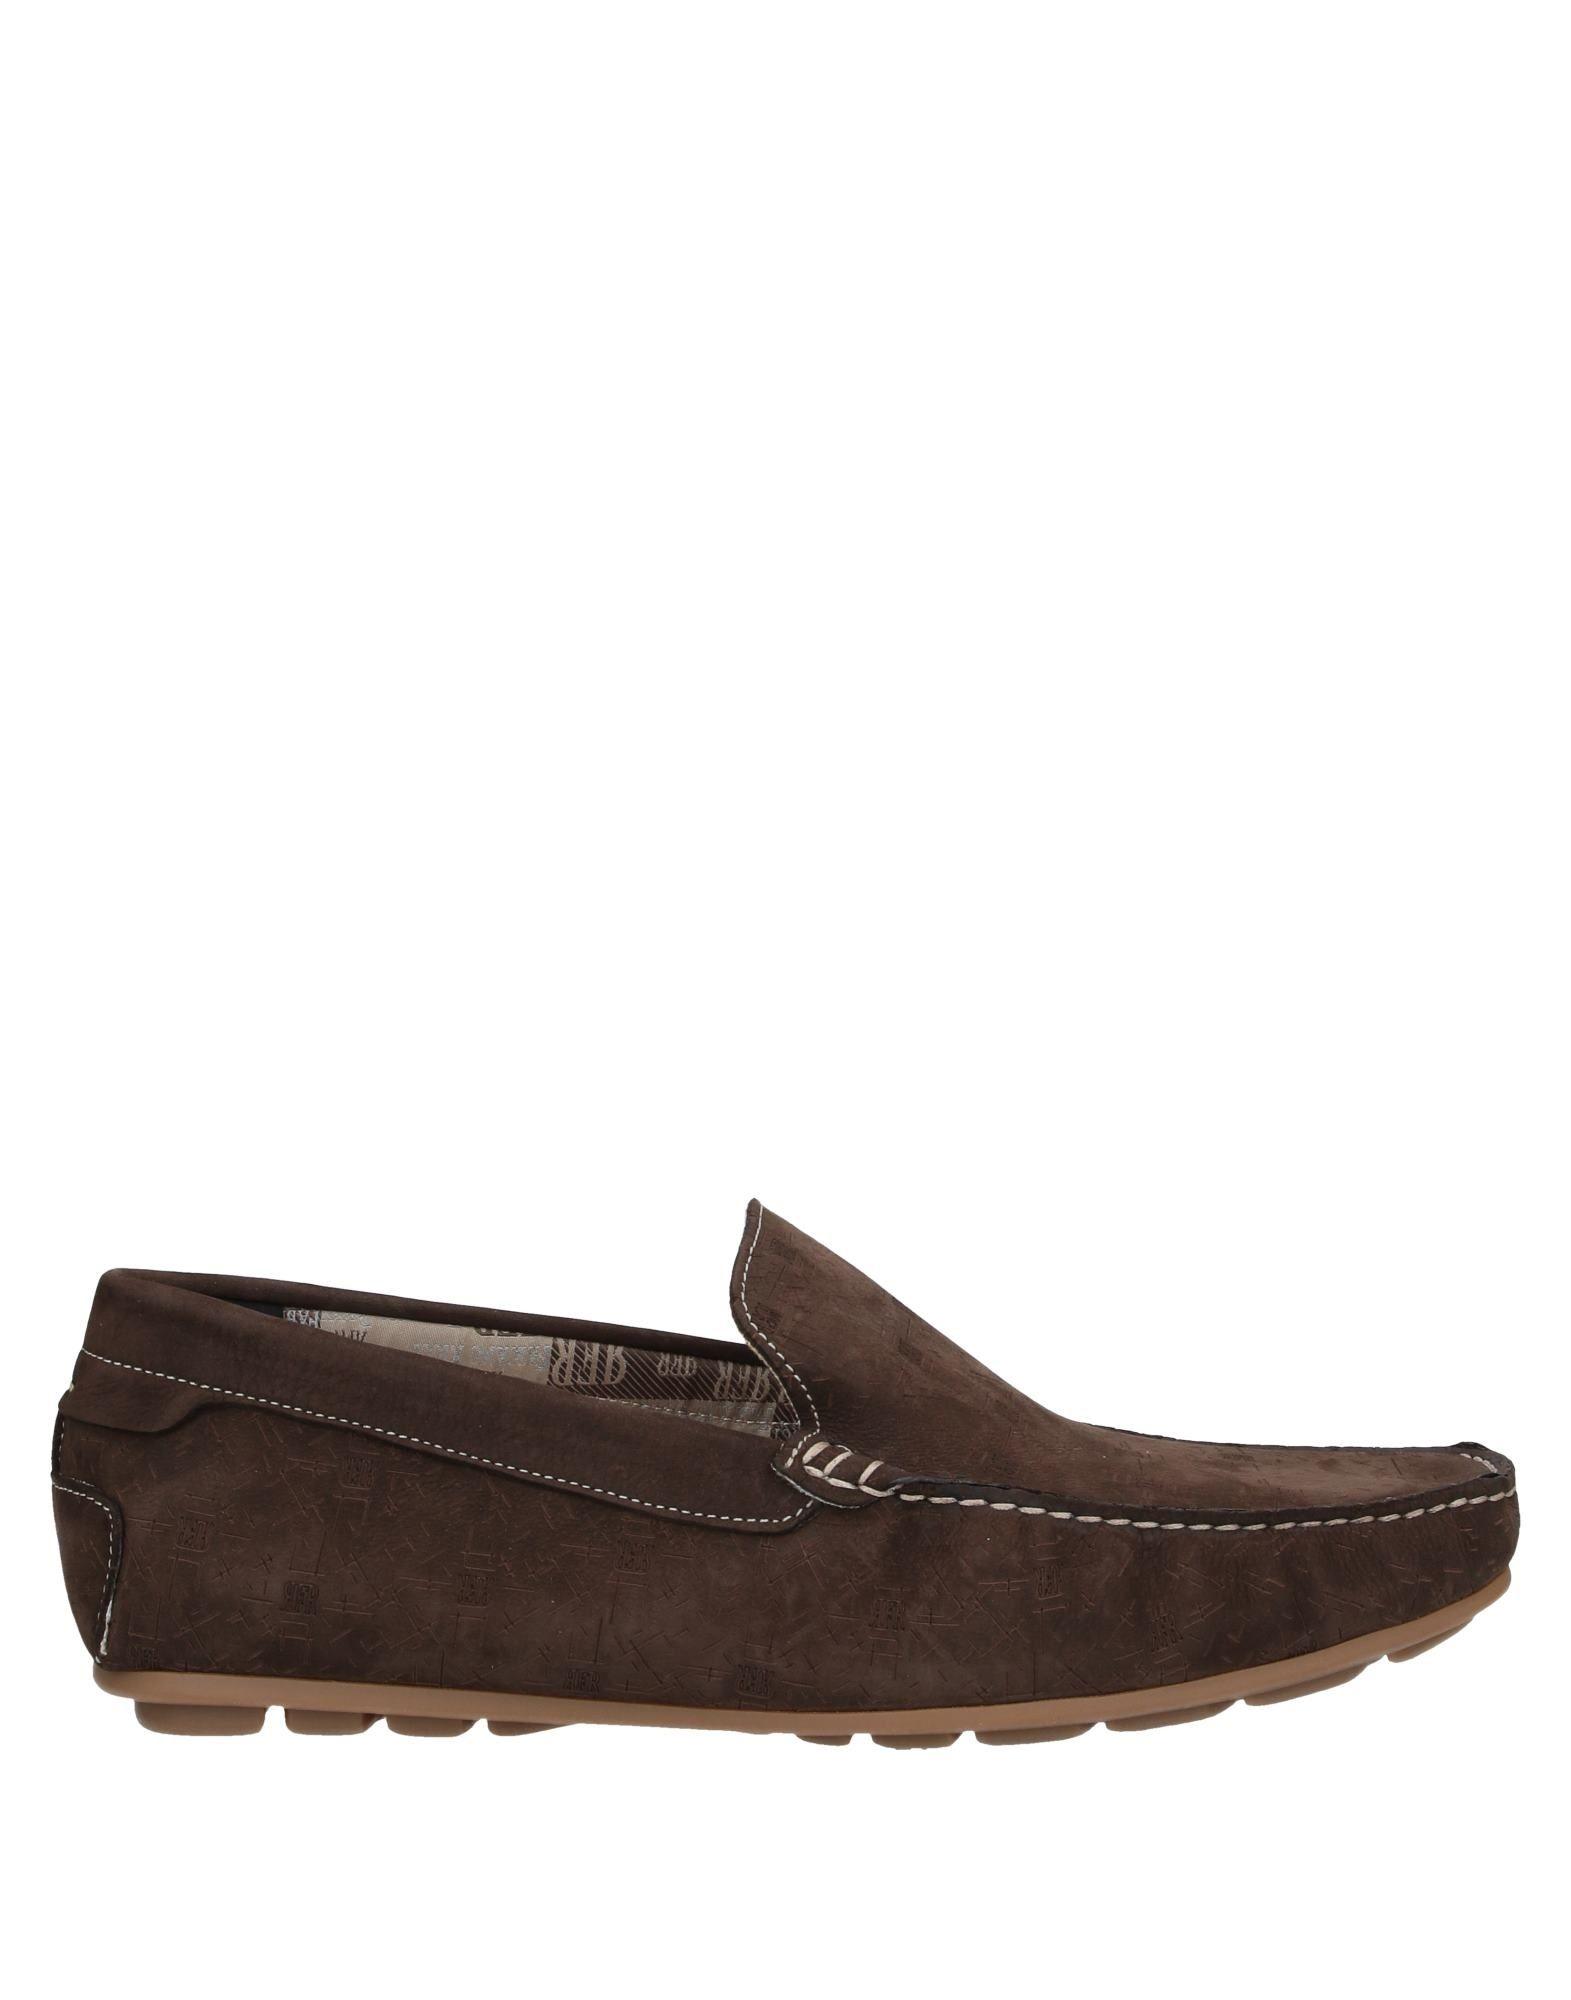 Fabiano Ricci Leather Loafer in Dark Brown (Brown) for Men - Lyst